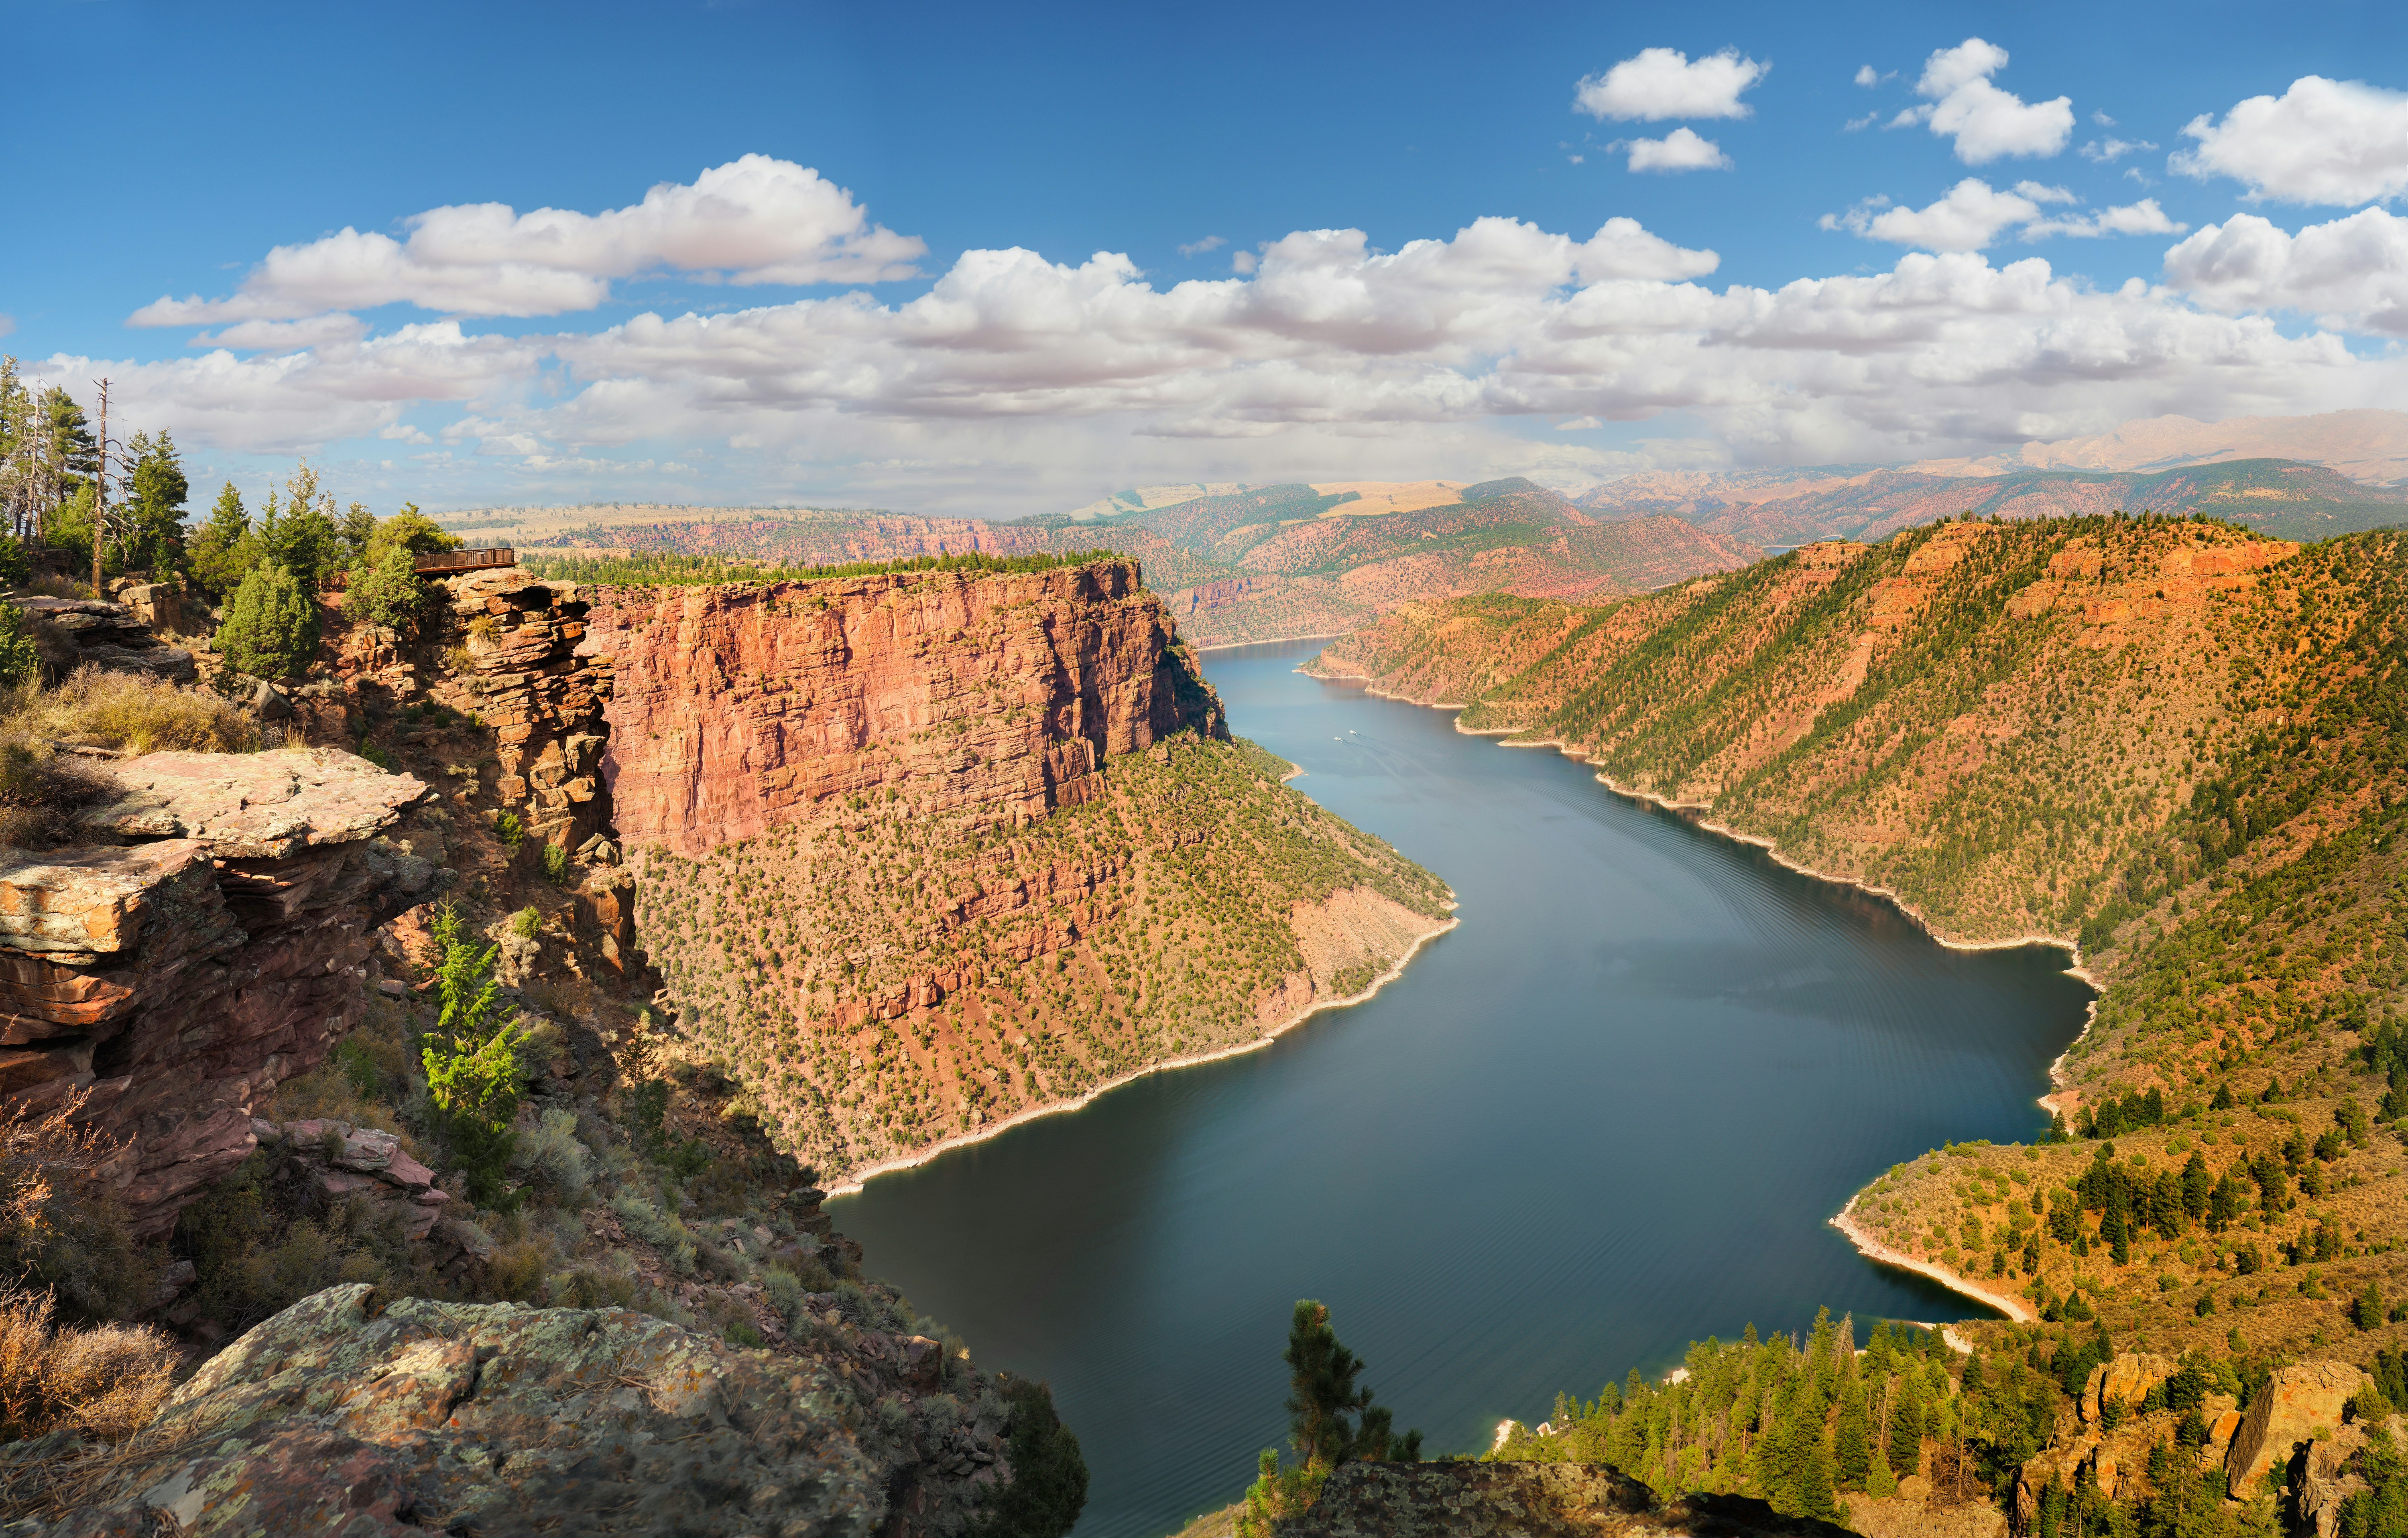 An aerial view of the  Green River Canyon flanked by the red cliffs of the Flaming Gorge National Monument in Wyoming